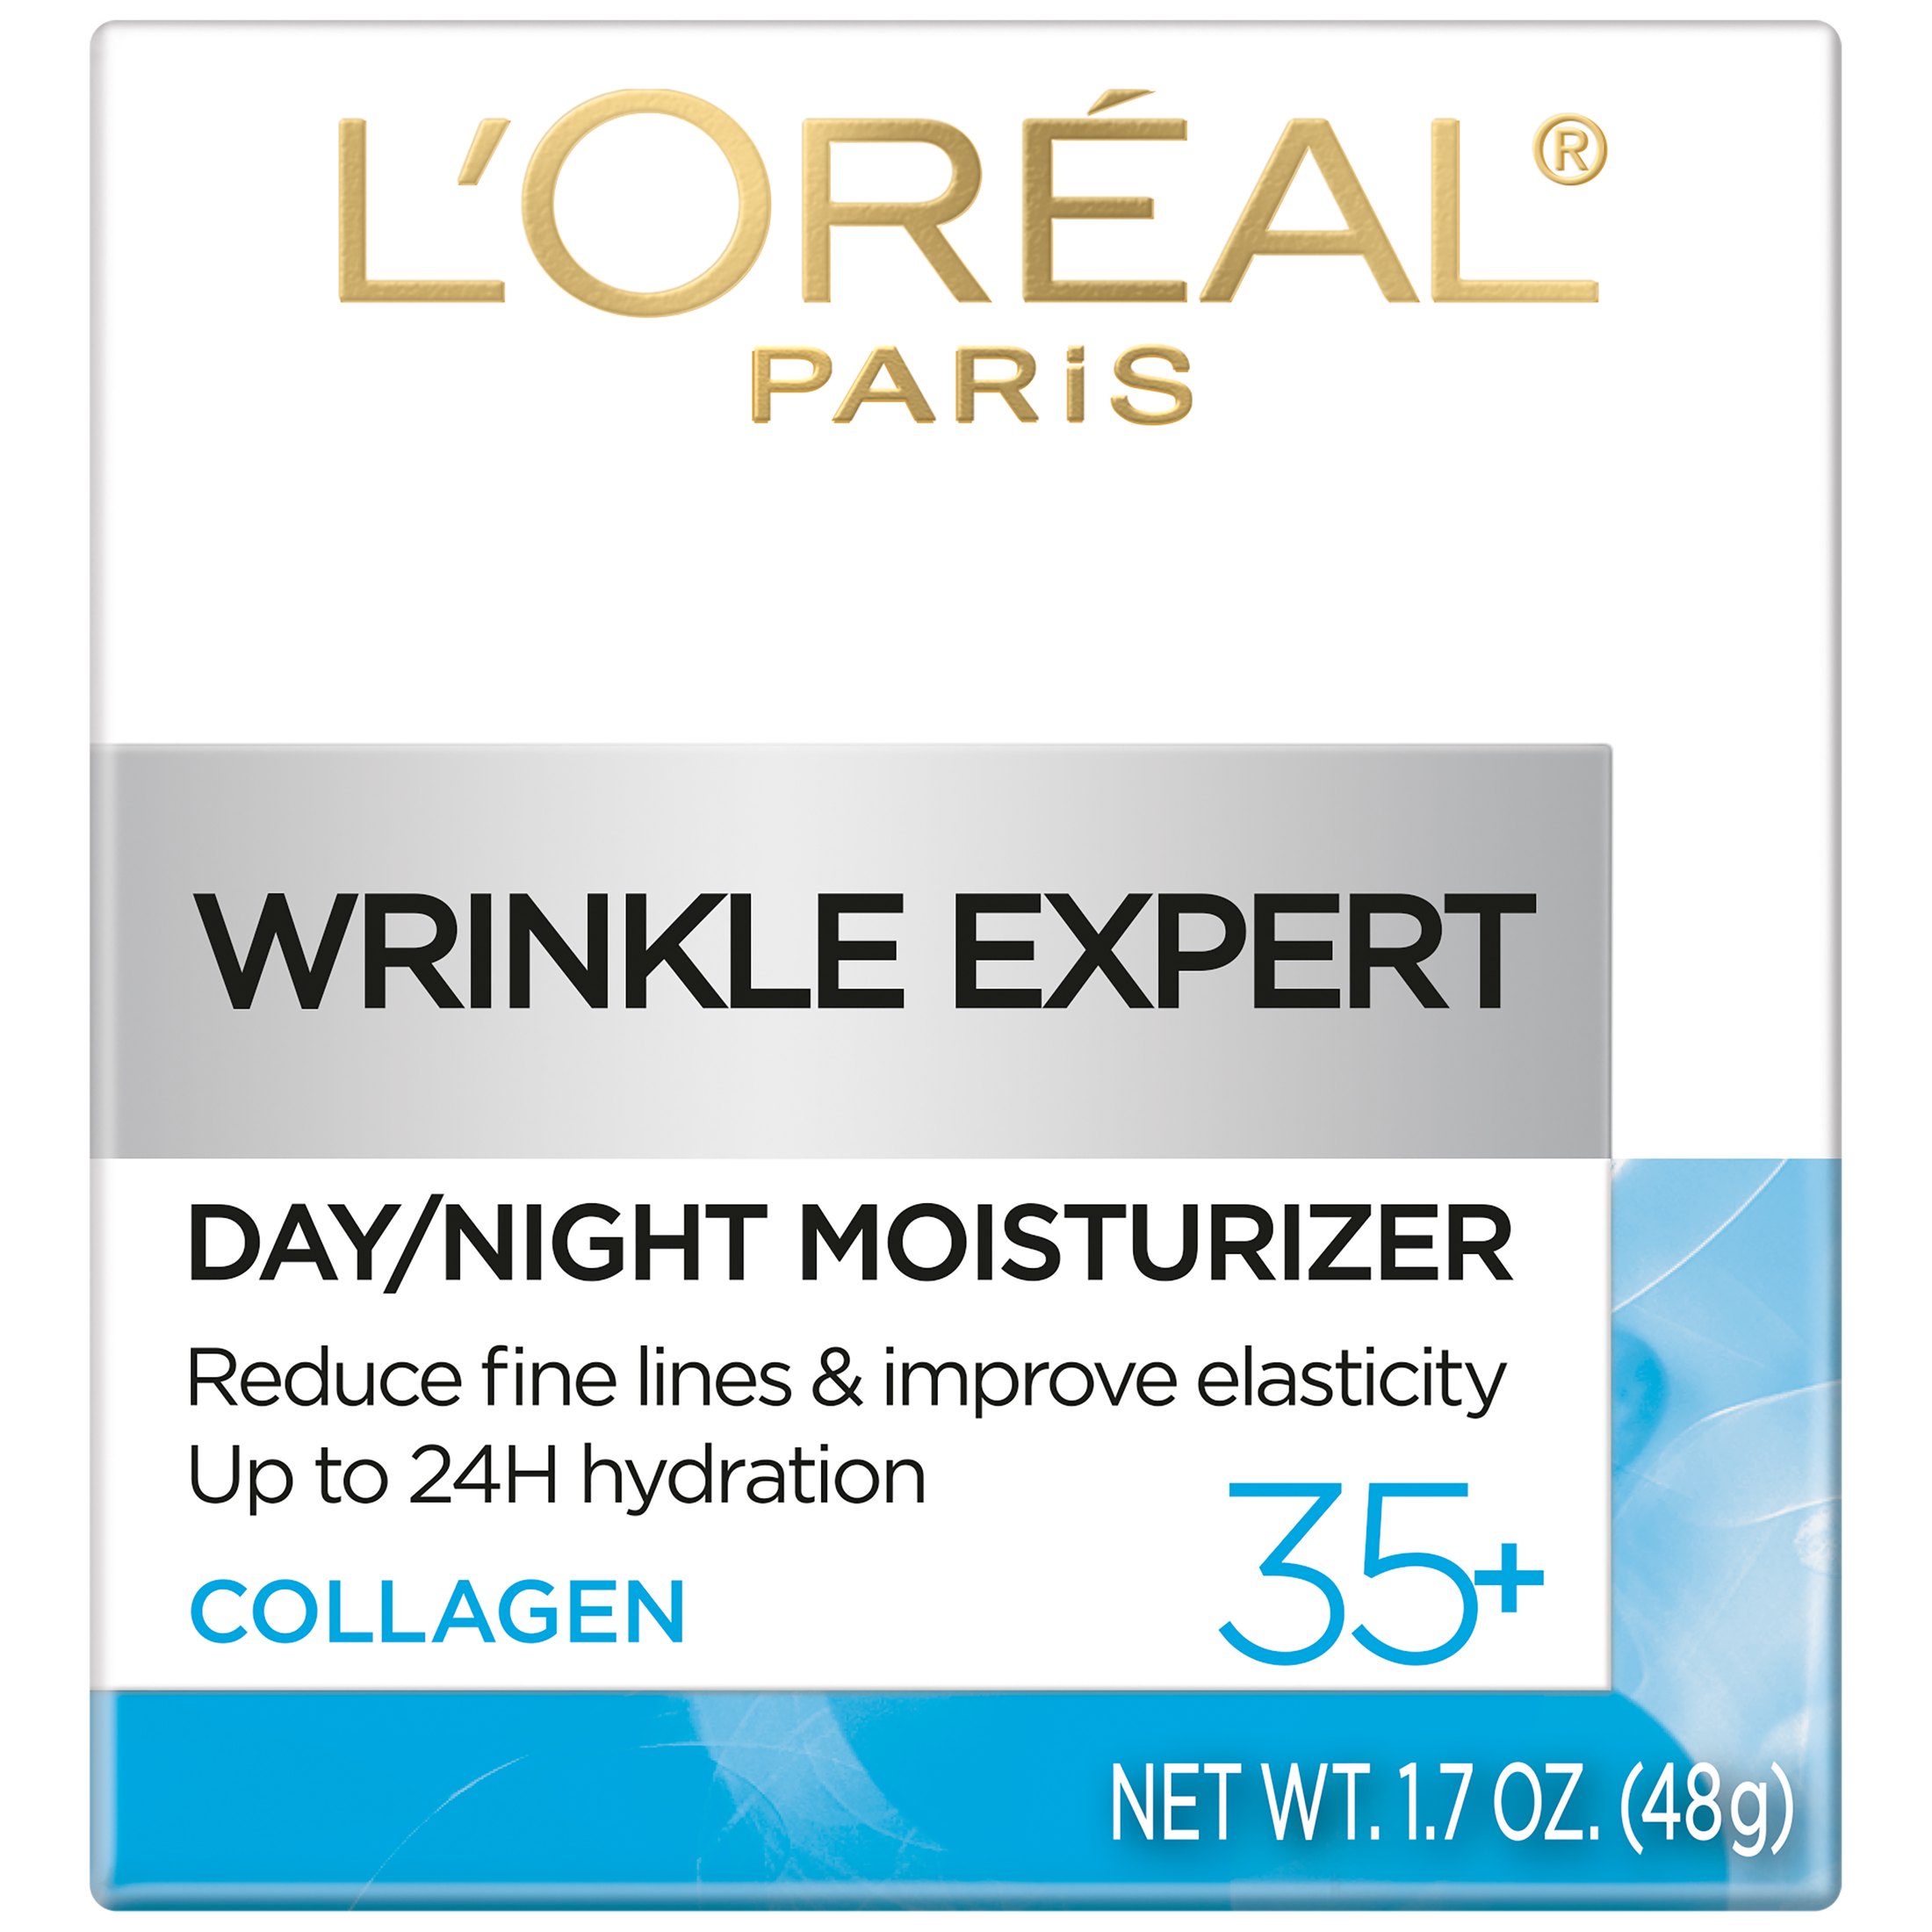 L'Oreal Paris Wrinkle Expert 35+ Day and Night Moisturizer, 1.7 oz - image 3 of 5